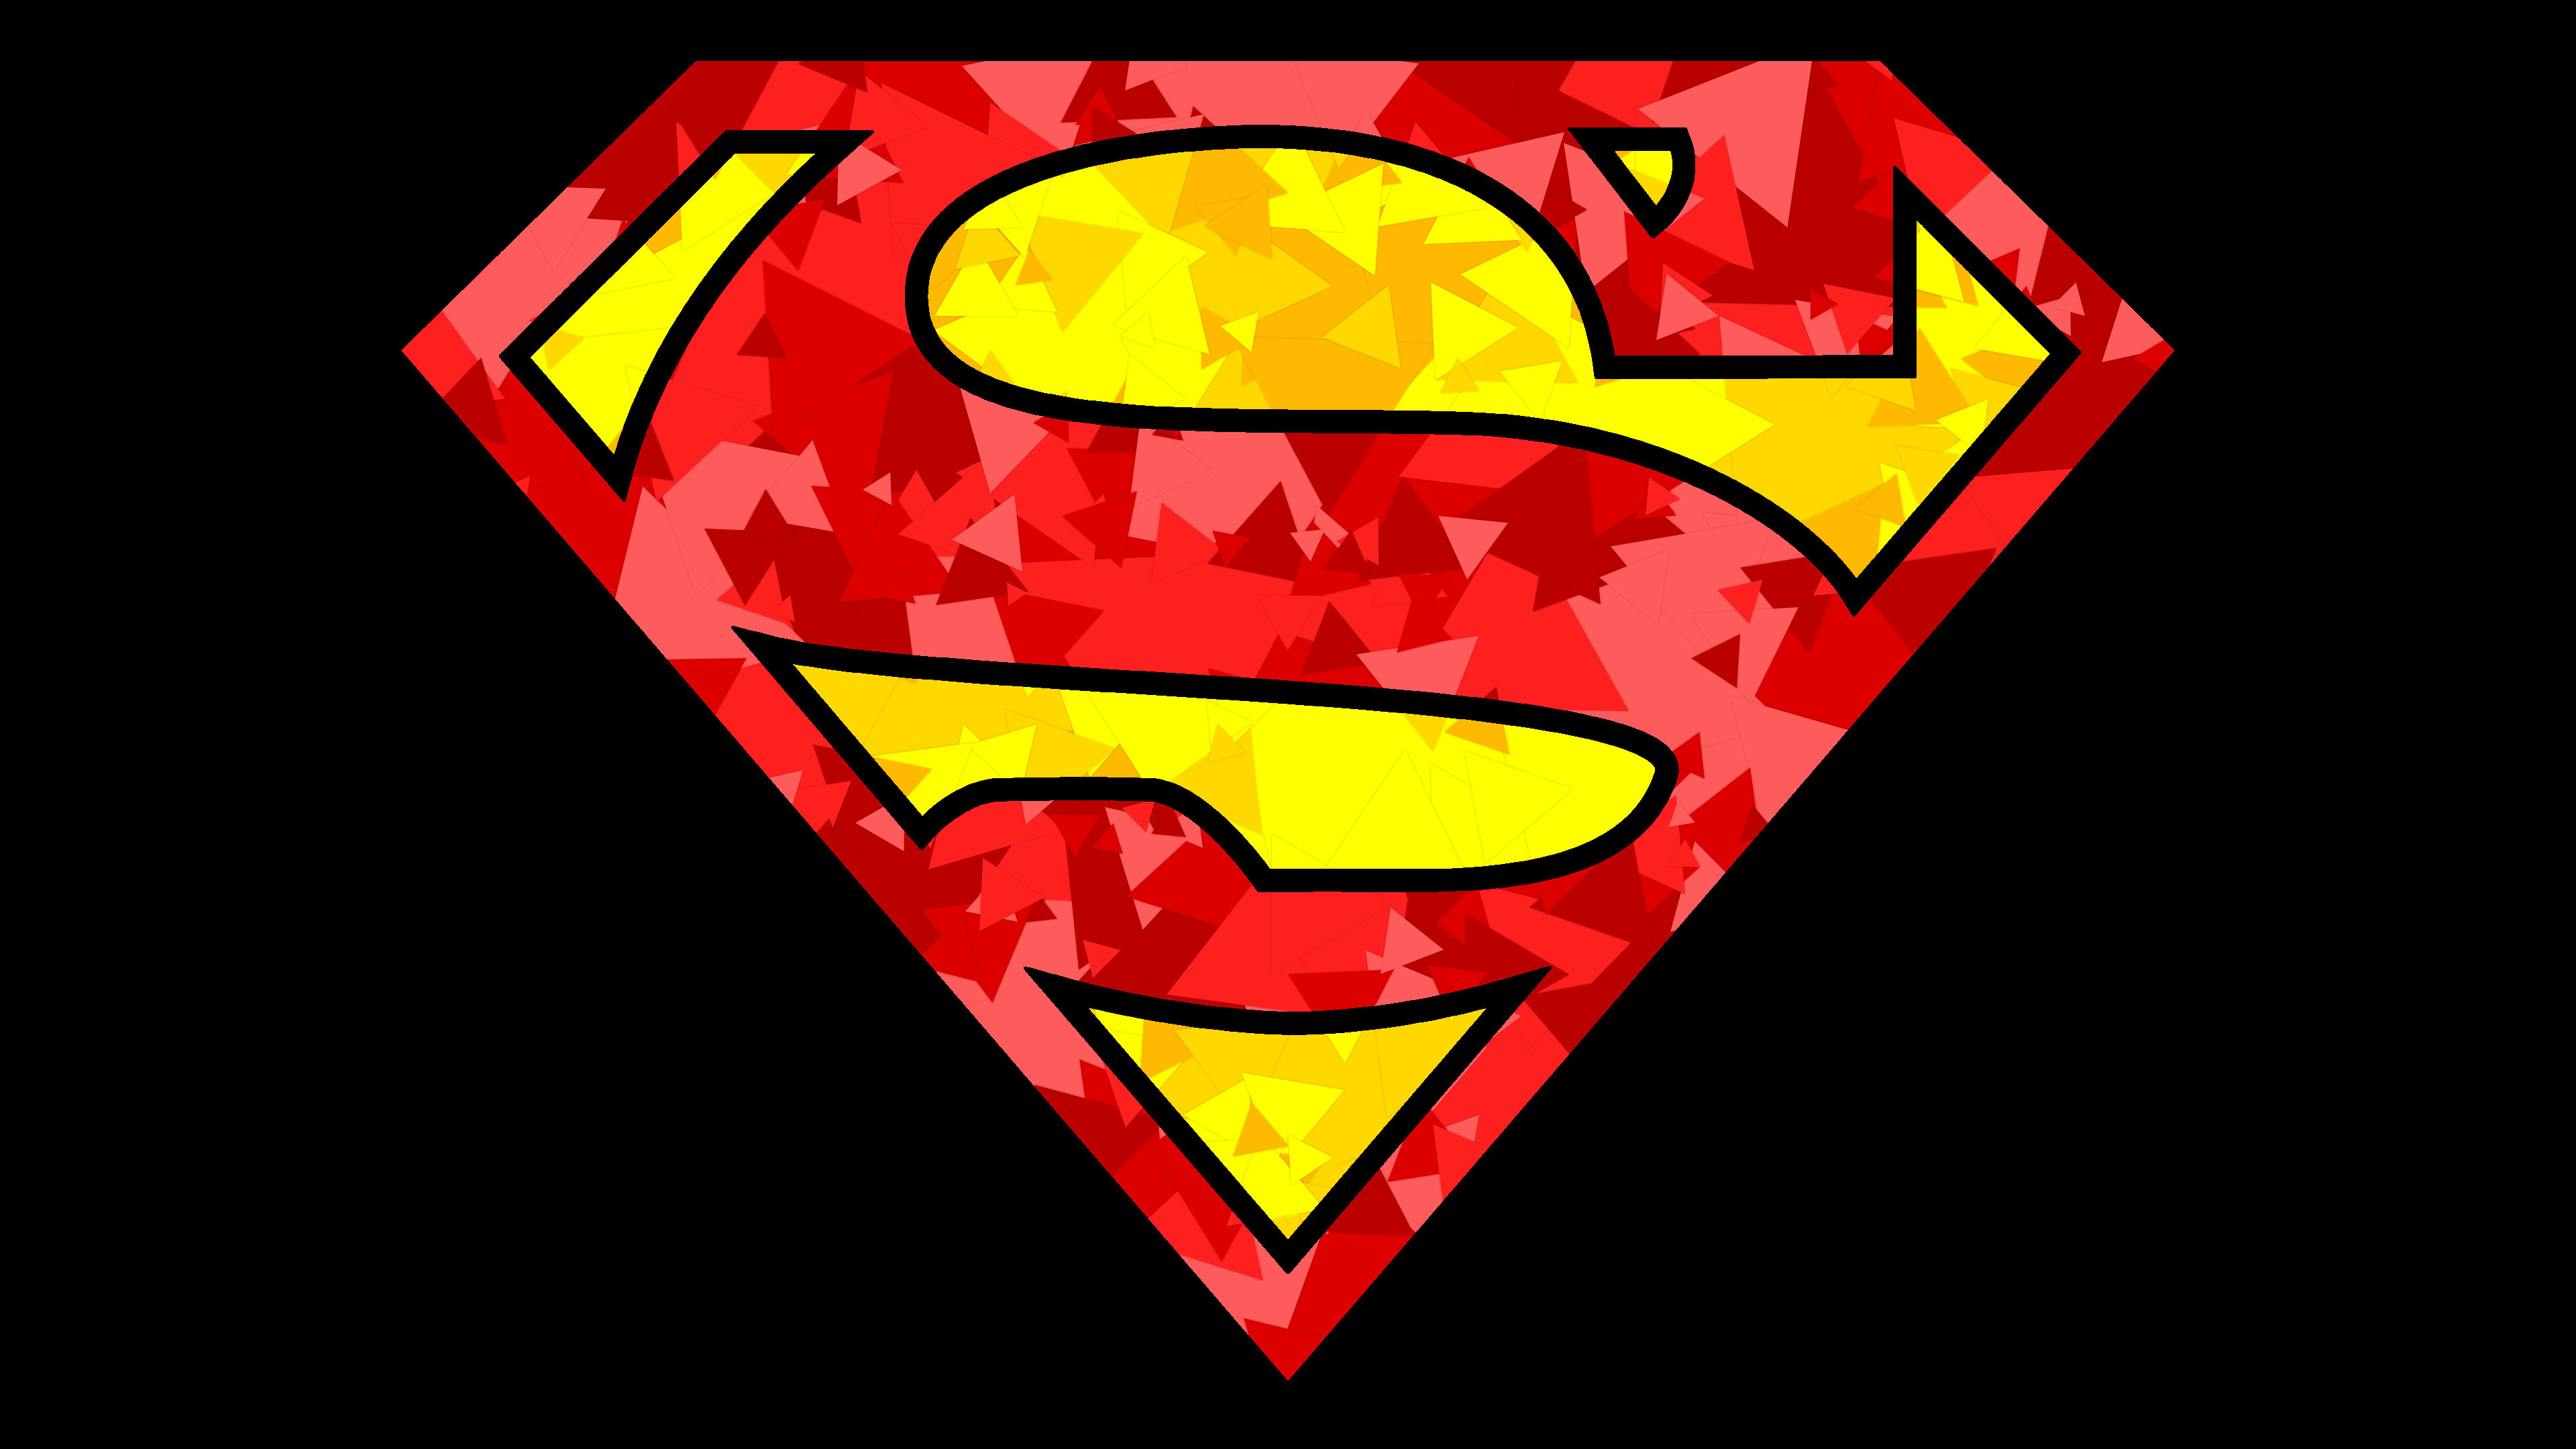 3840x2160 Superman Facet by kadhirfullycharged on DeviantArt